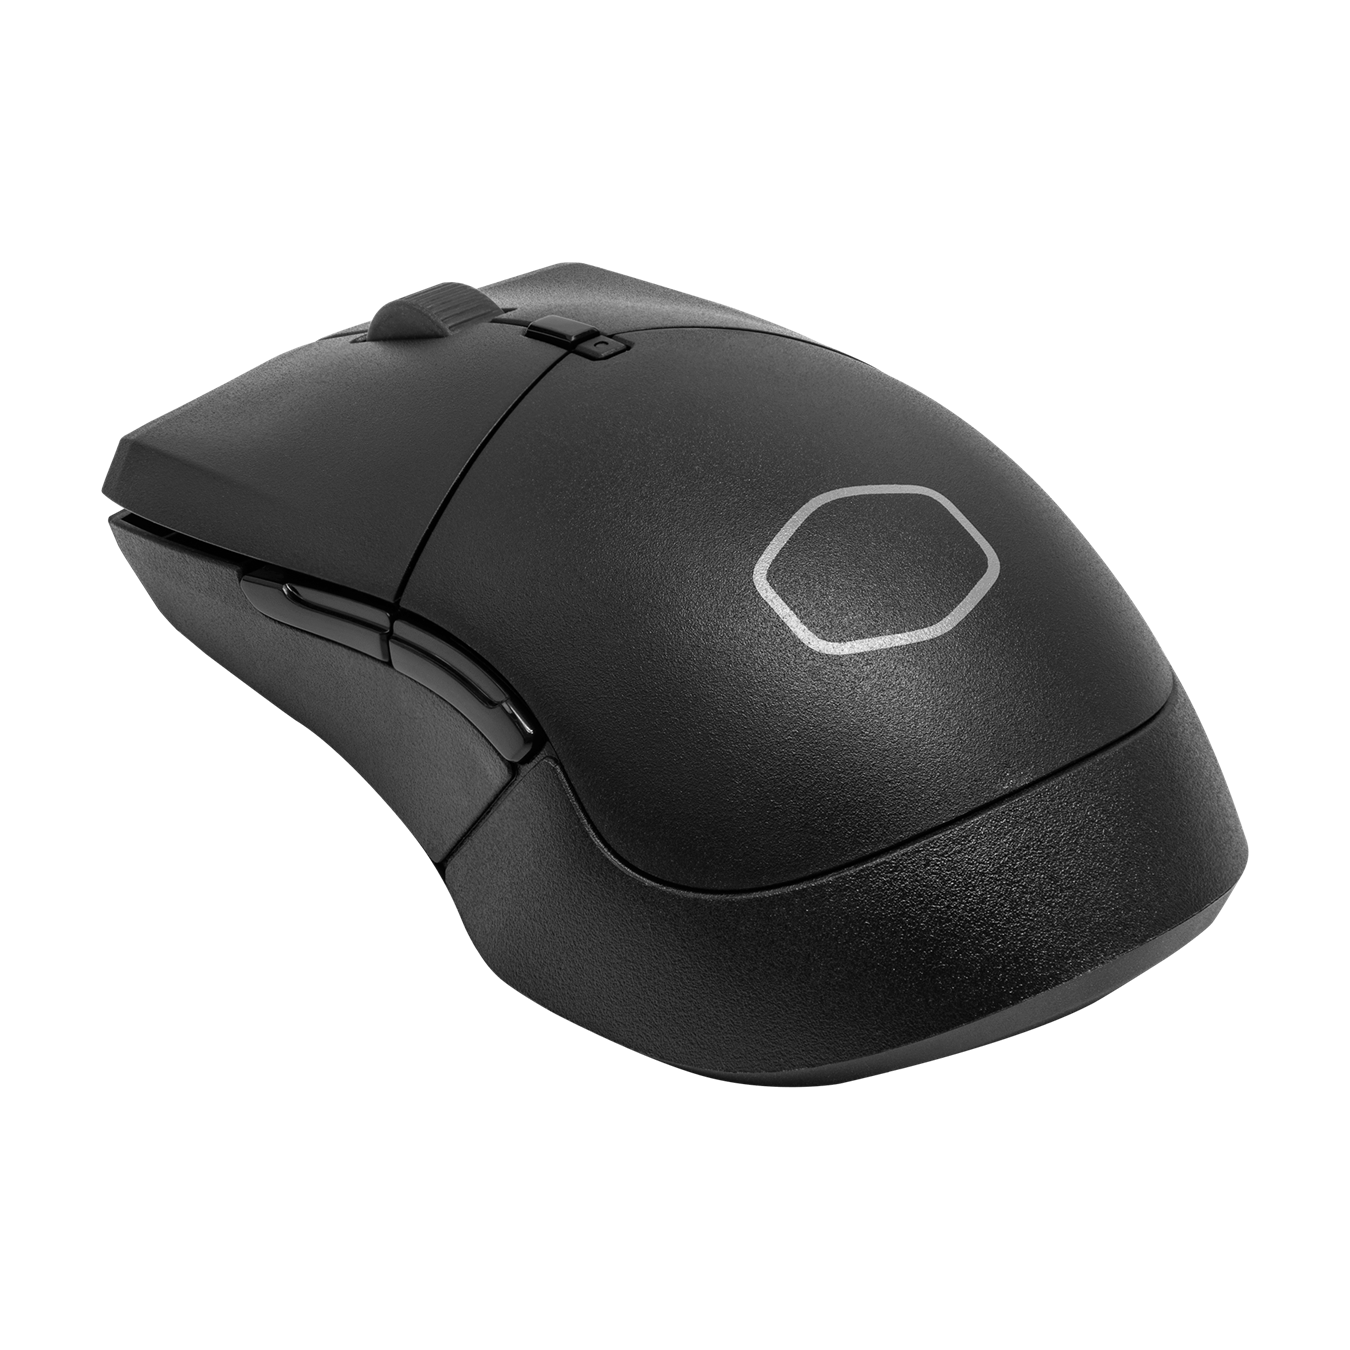 MM311 Wireless Mouse - Fast, stable transmission with a longer connection distance